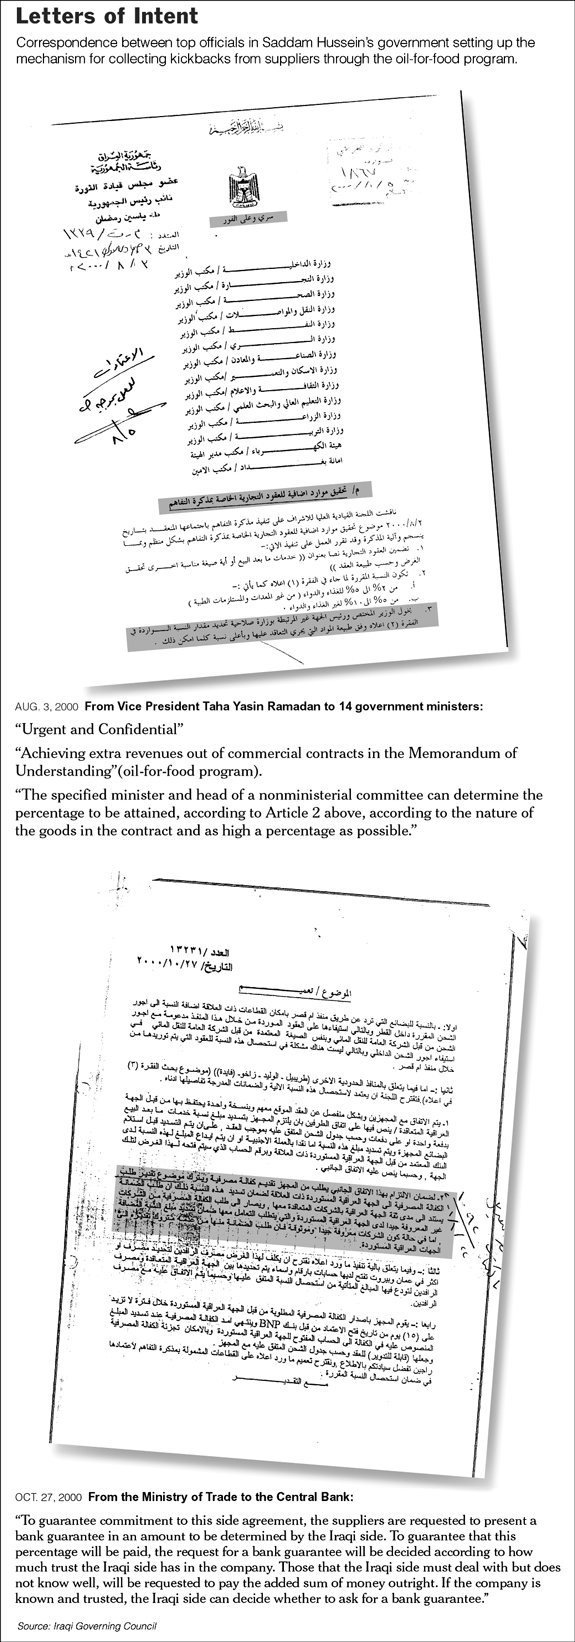 Secret correspondences from Mr. Hussein's top lieutenants setting up a formal mechanism to siphon cash from Iraq's business deals, August and October 2000.